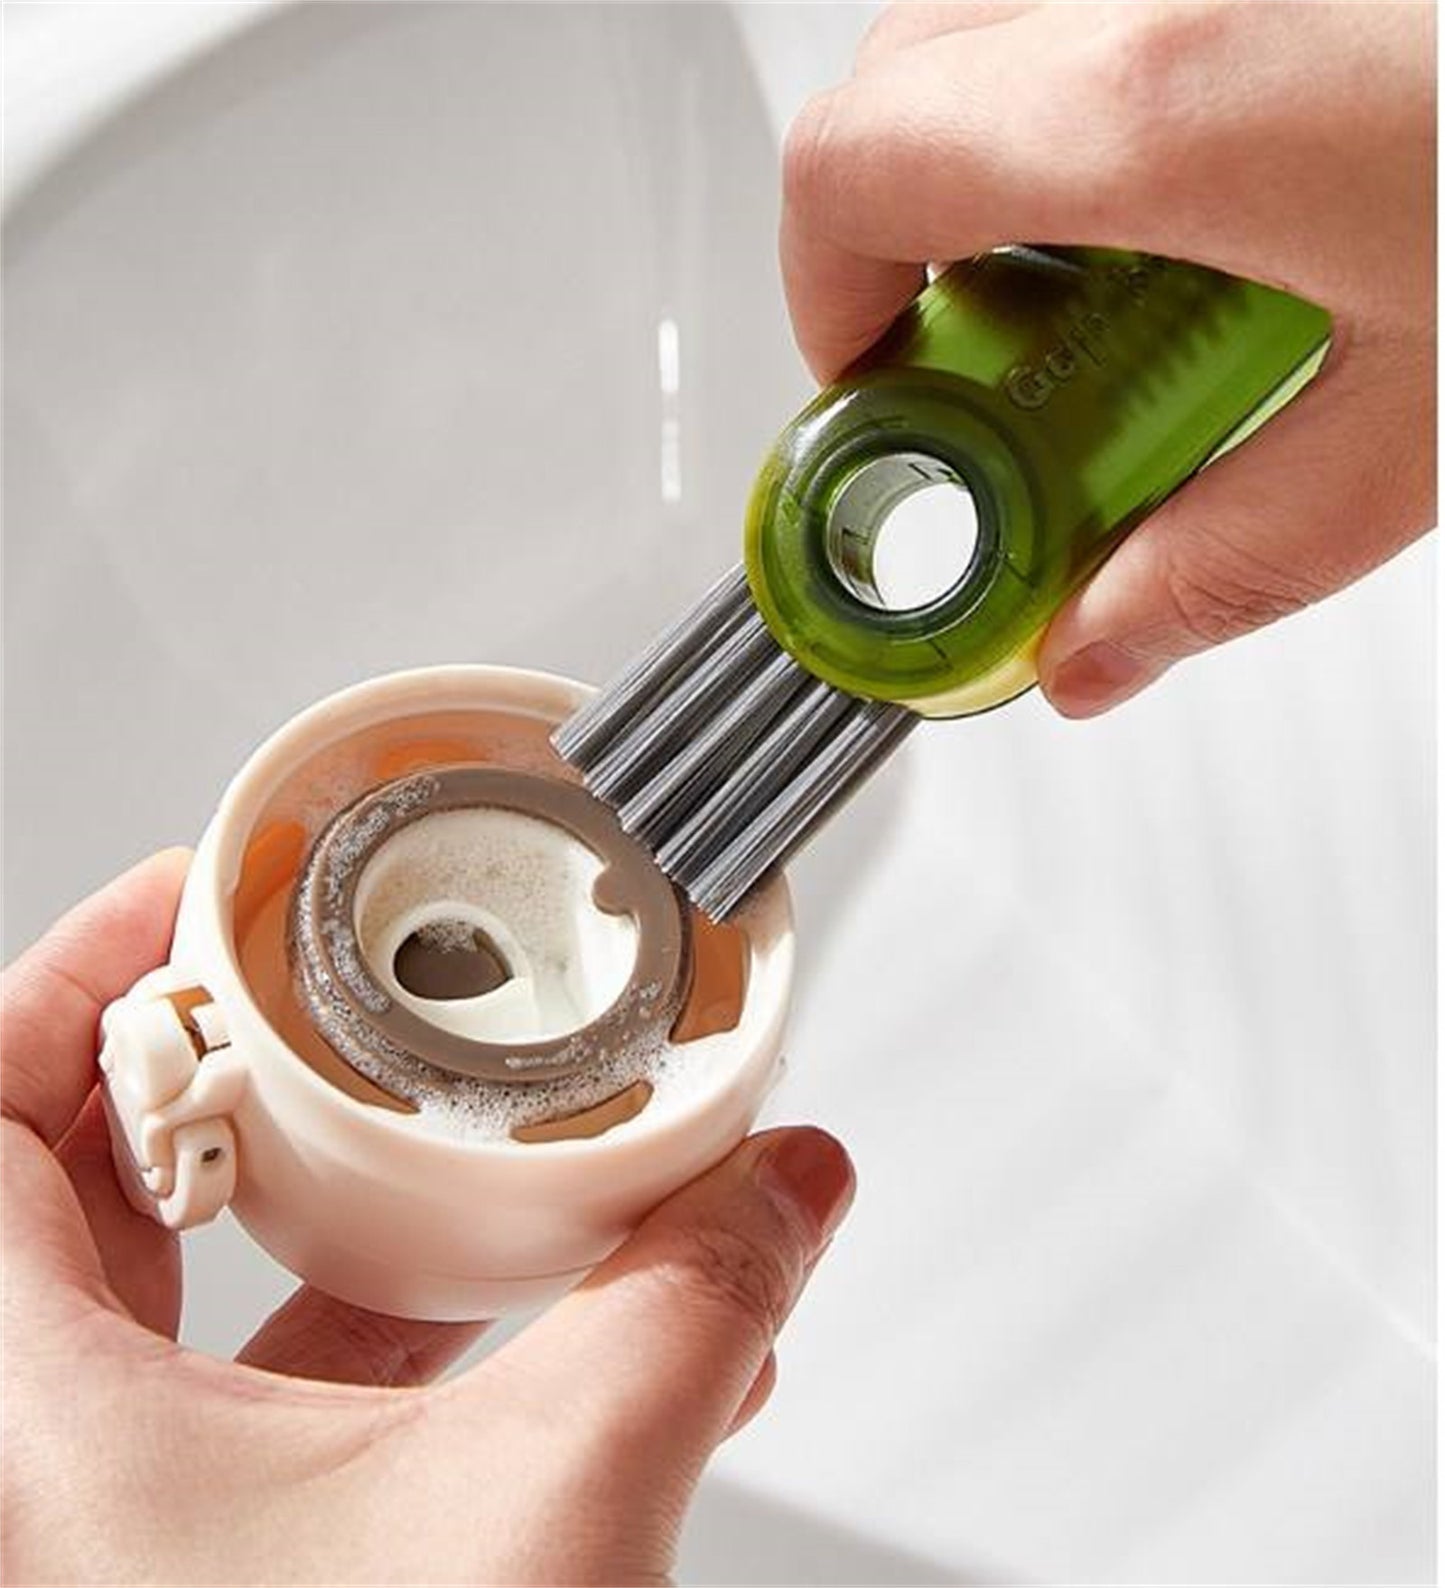 Cleanix Multi-purpose Cup Cleaning Brush Three-in-one Gap Cup Brush Cleaning Tool